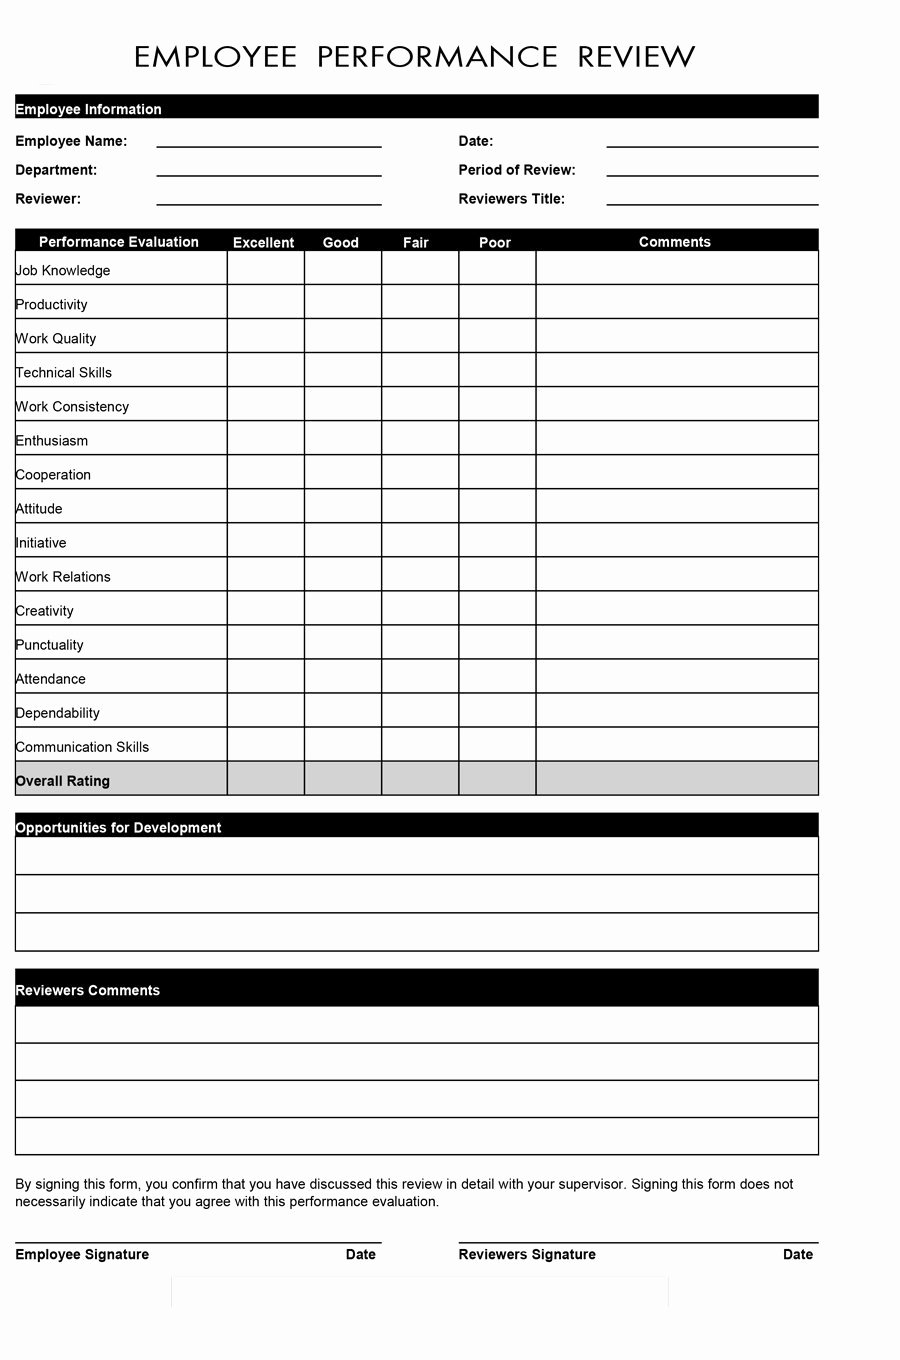 Performance Review form Template Awesome 46 Employee Evaluation forms &amp; Performance Review Examples